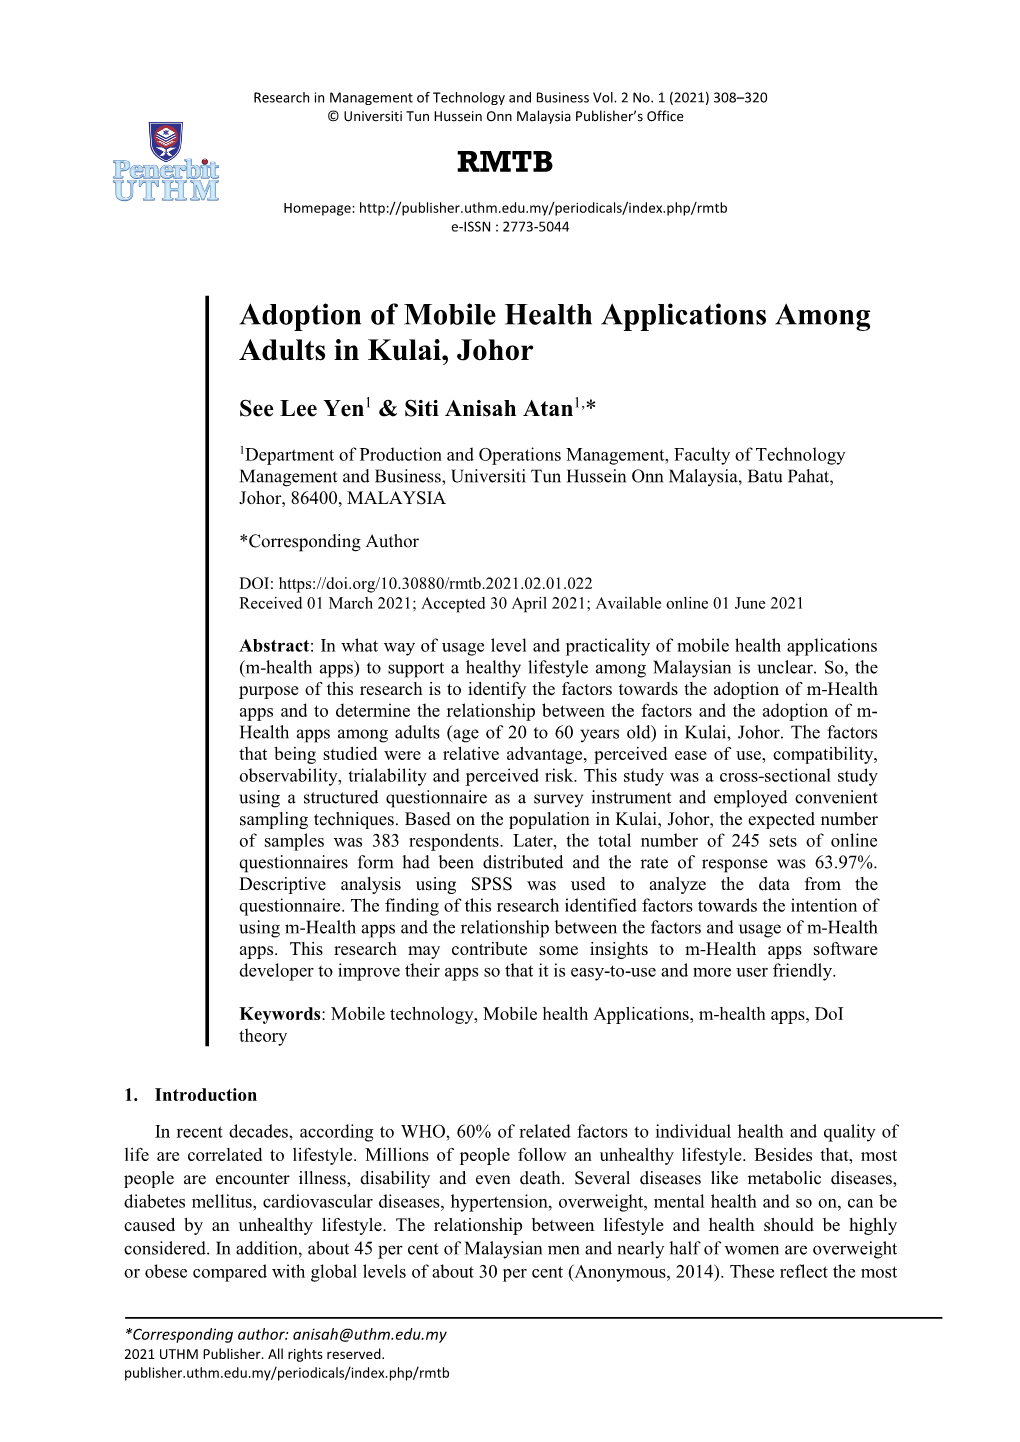 RMTB Adoption of Mobile Health Applications Among Adults in Kulai